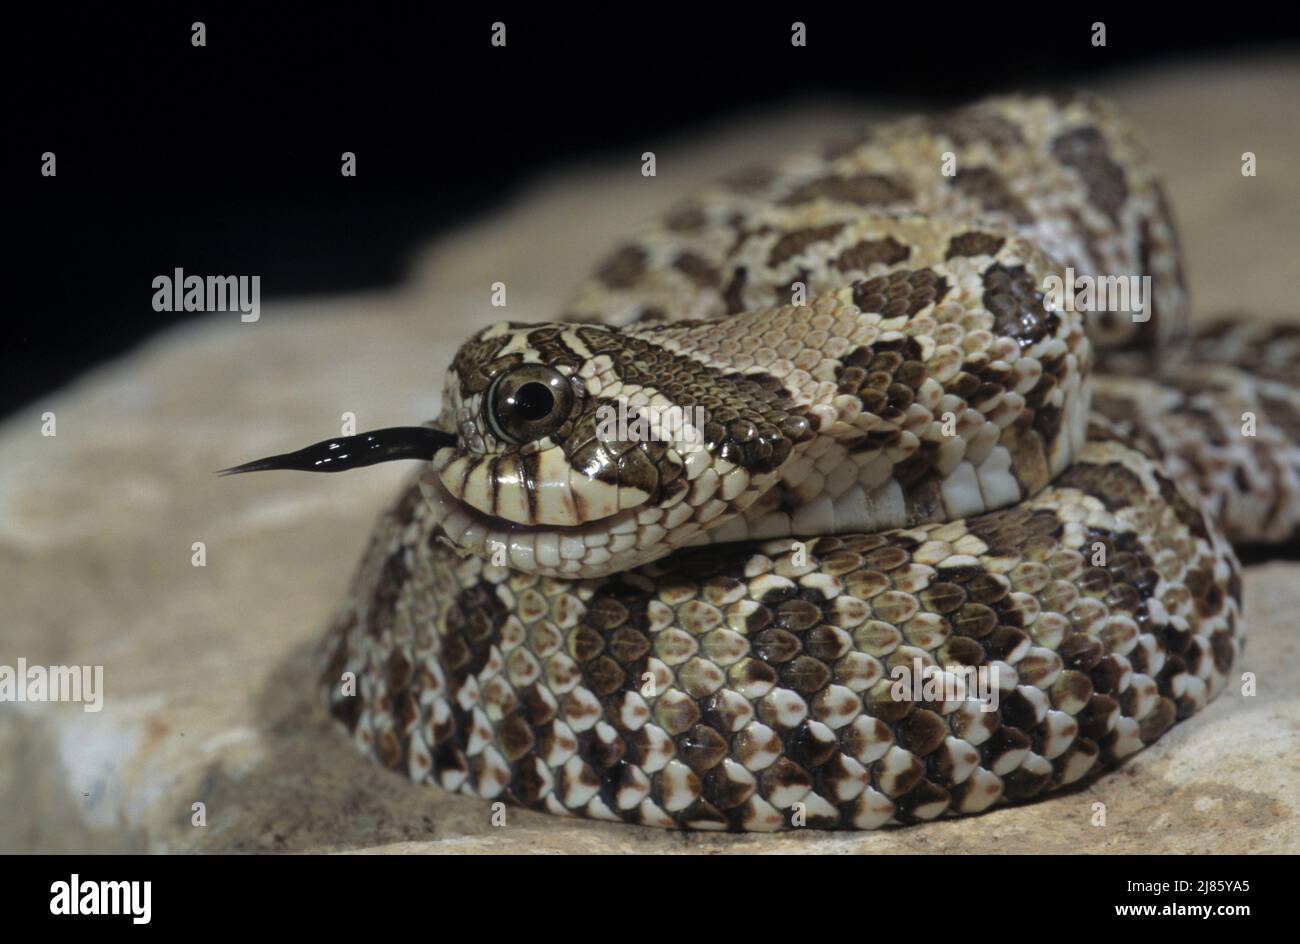 Western hognose snake with a malformation Stock Photo